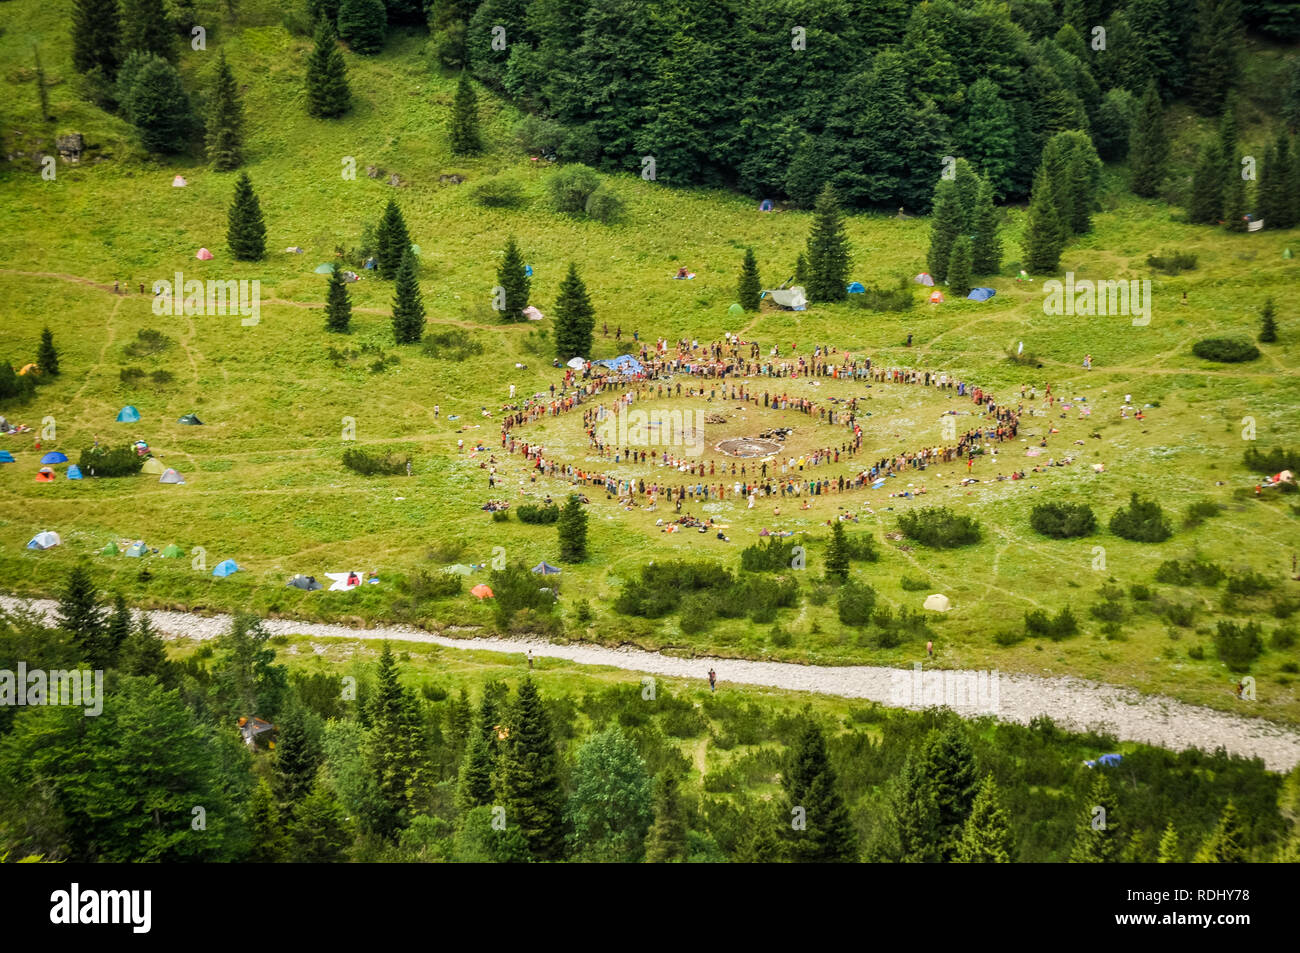 People standing in circles during festival in nature. Stock Photo